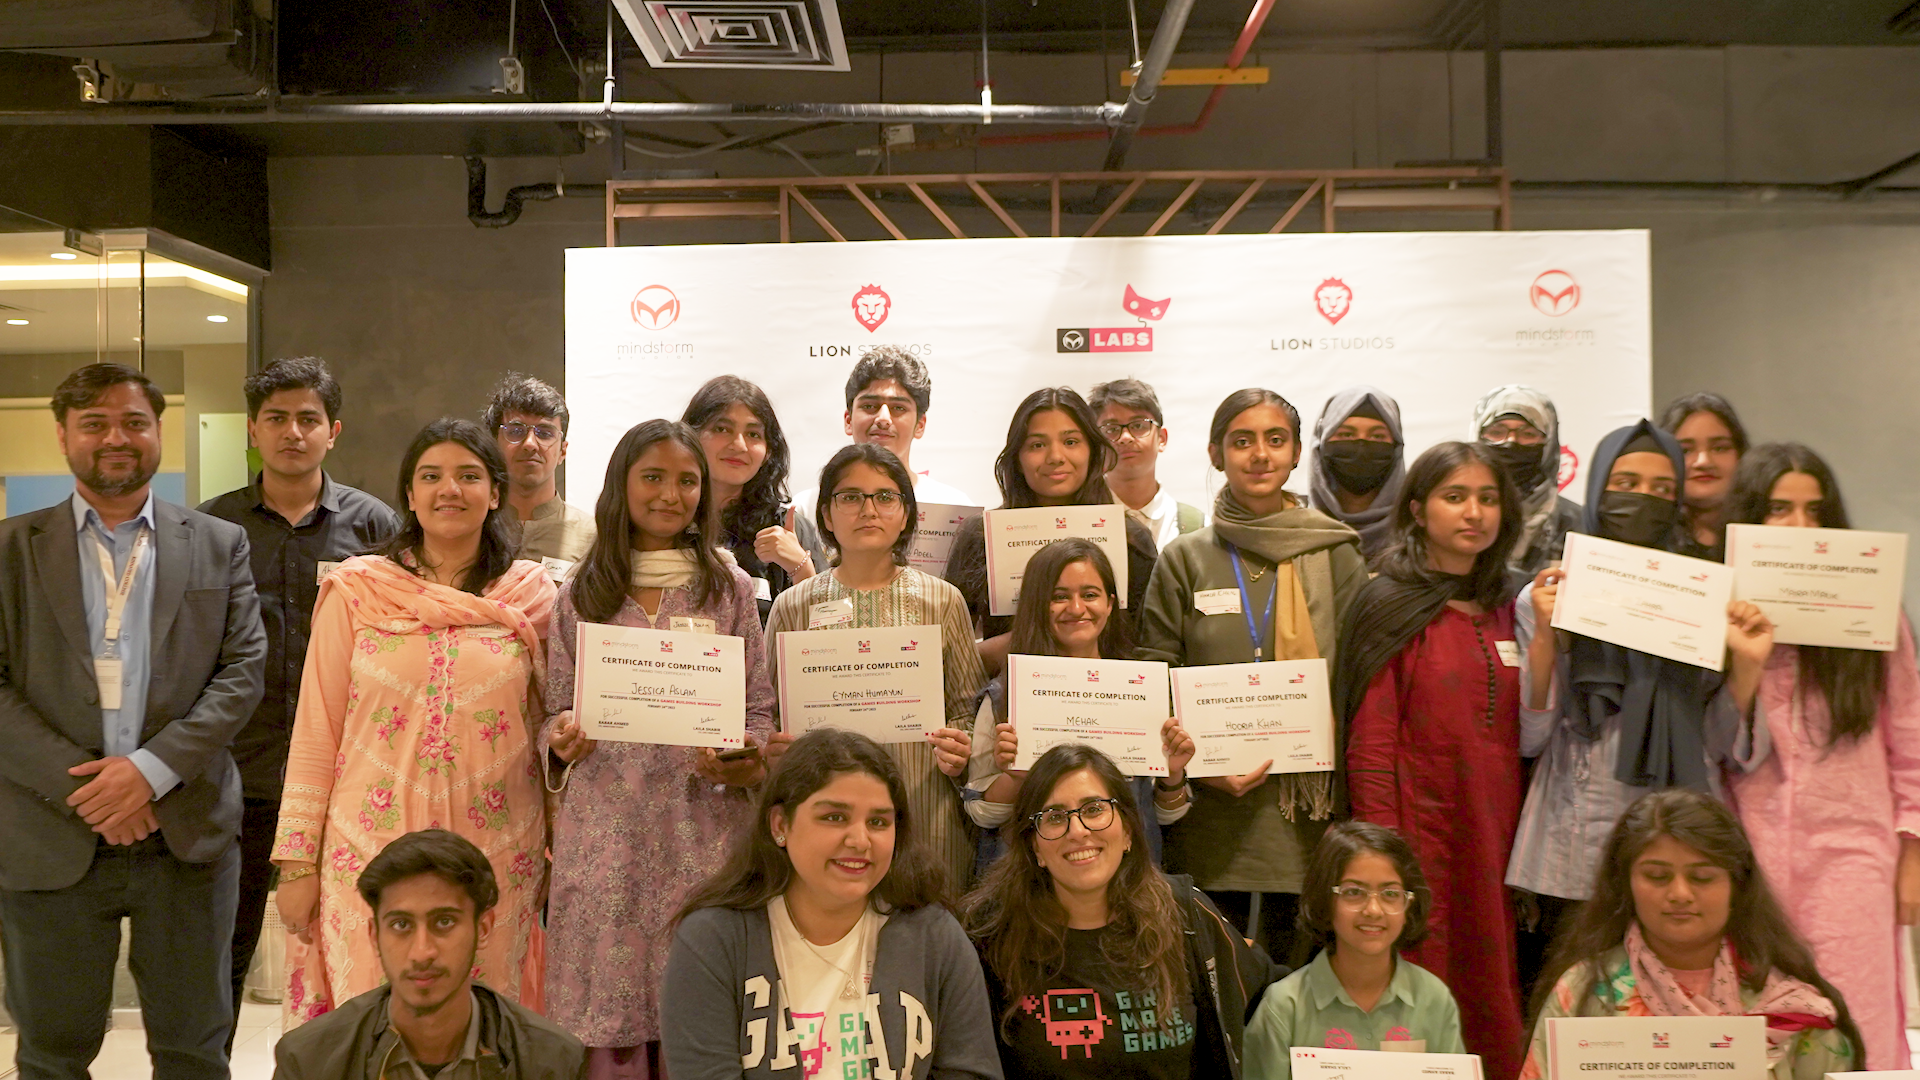 Introduction To Game Development Workshop By Girls Make Games (GMG)